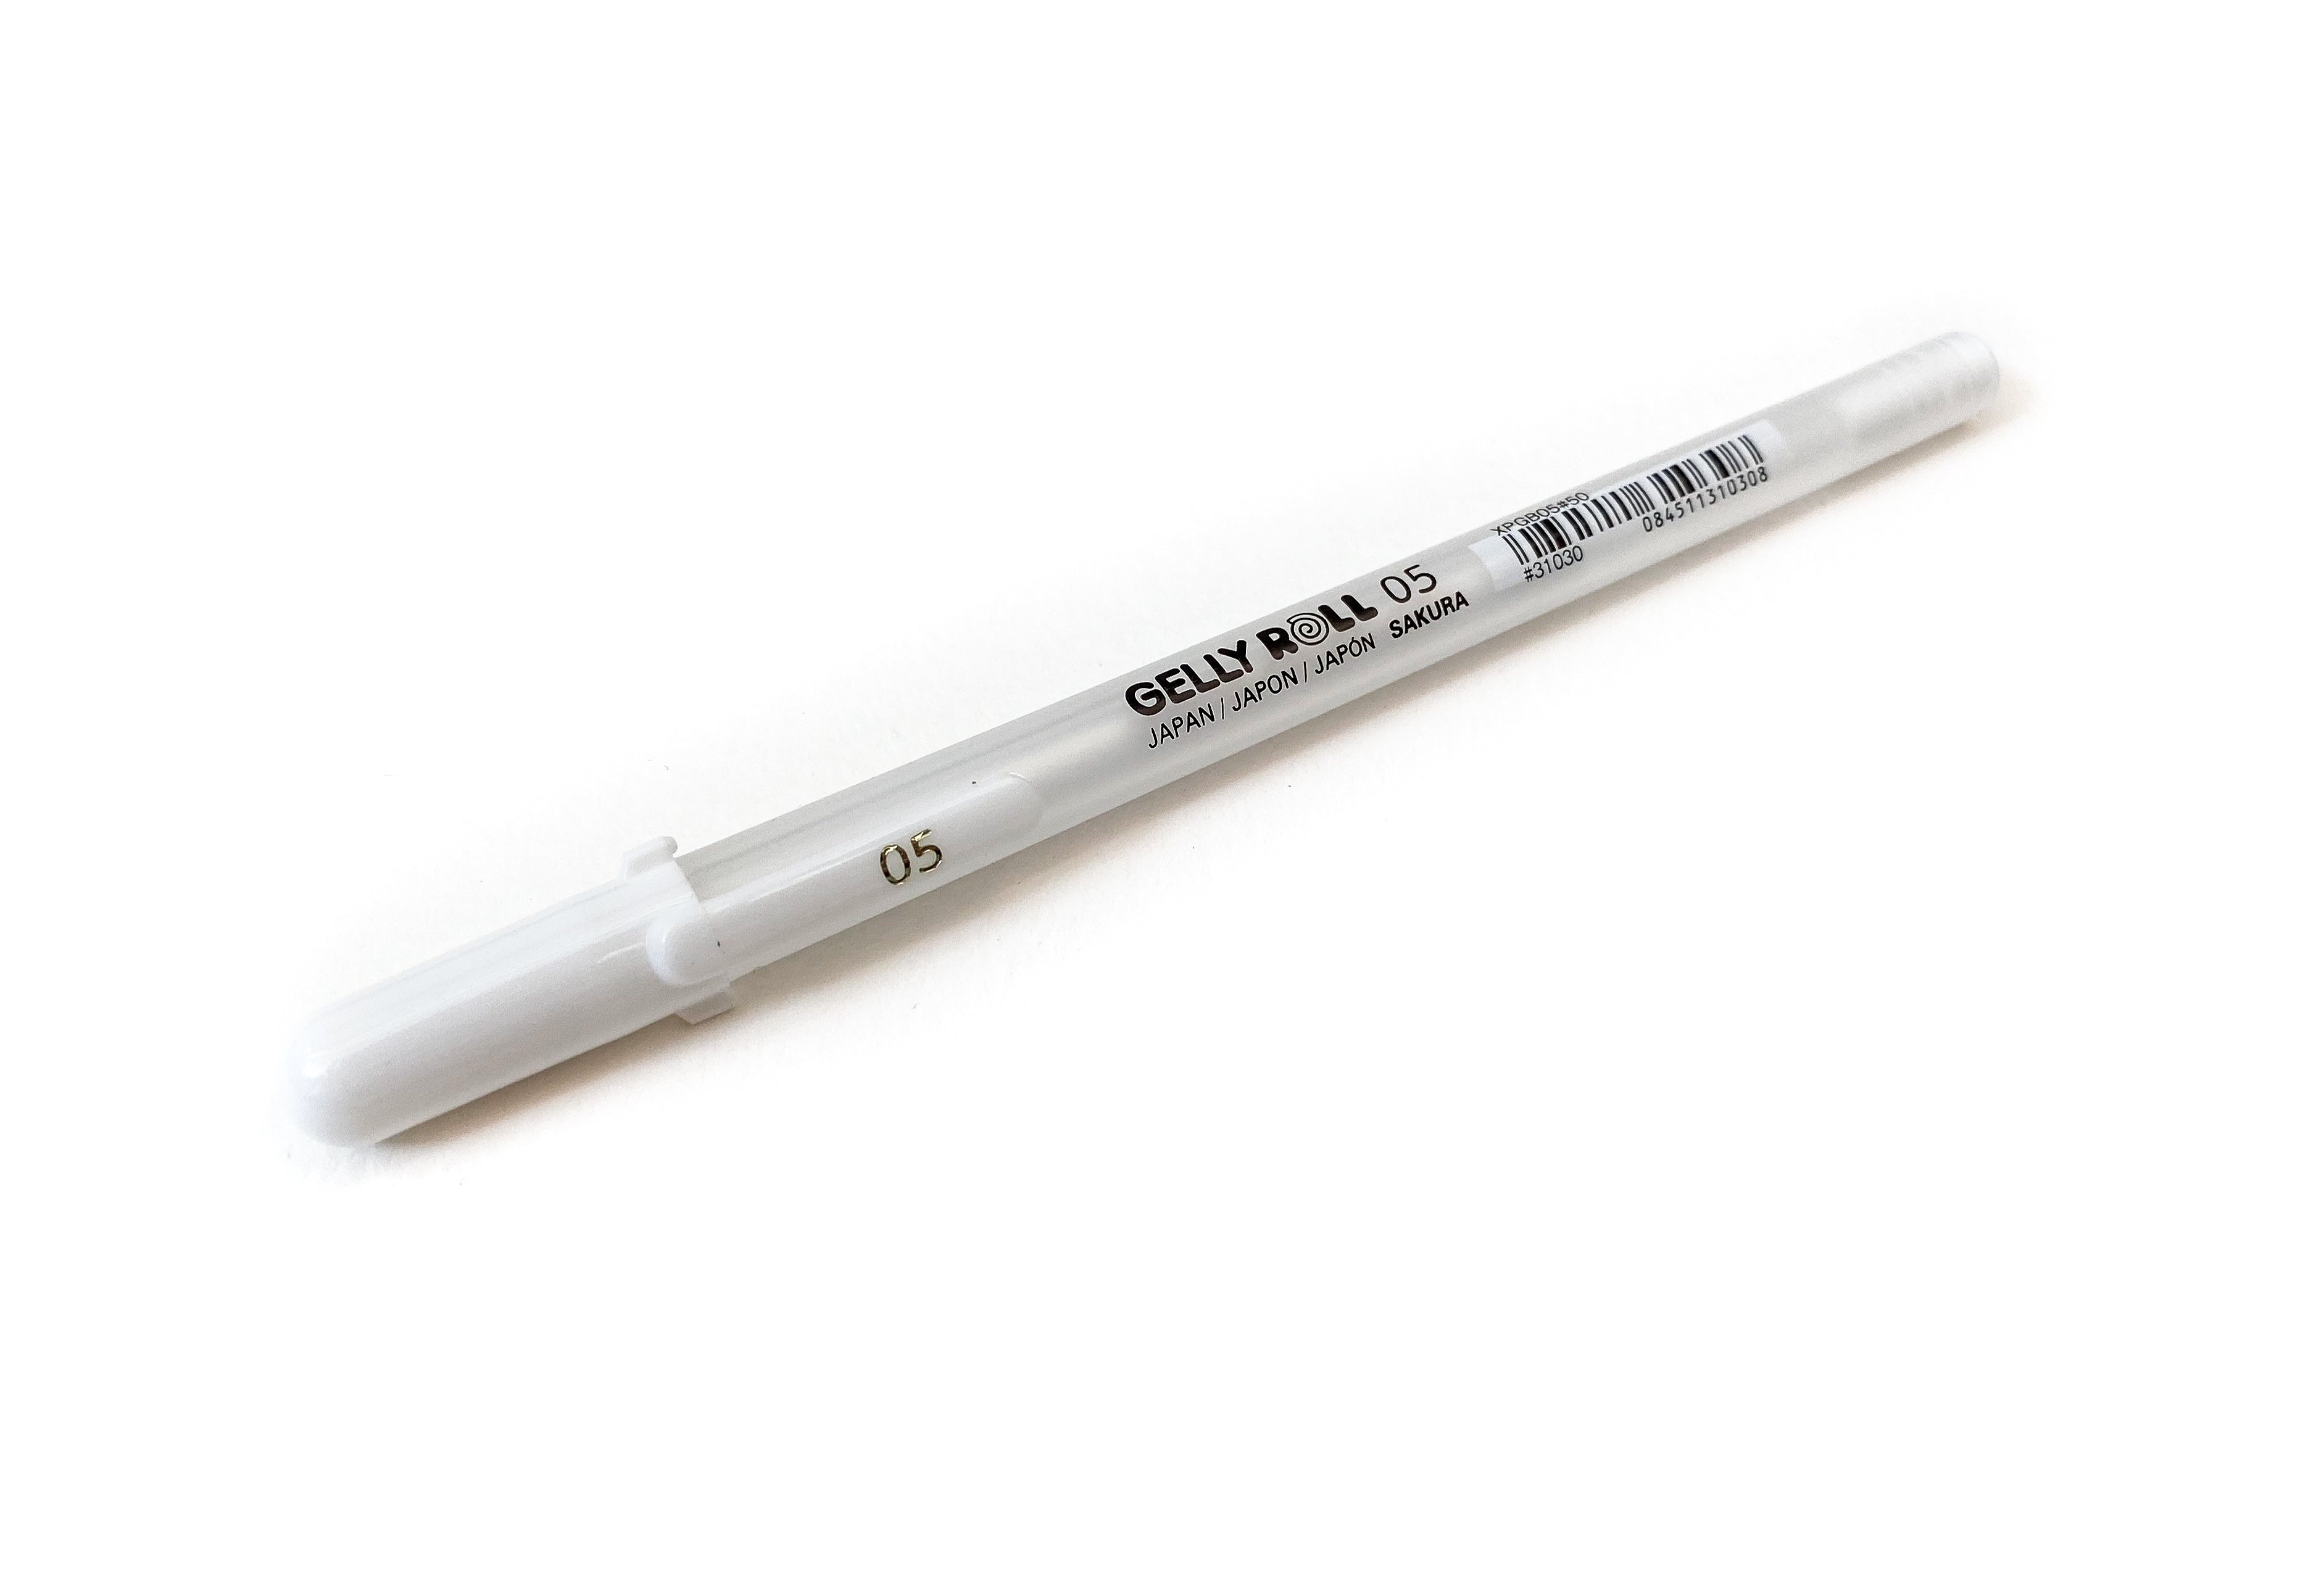 Classic Gelly Roll Pen White